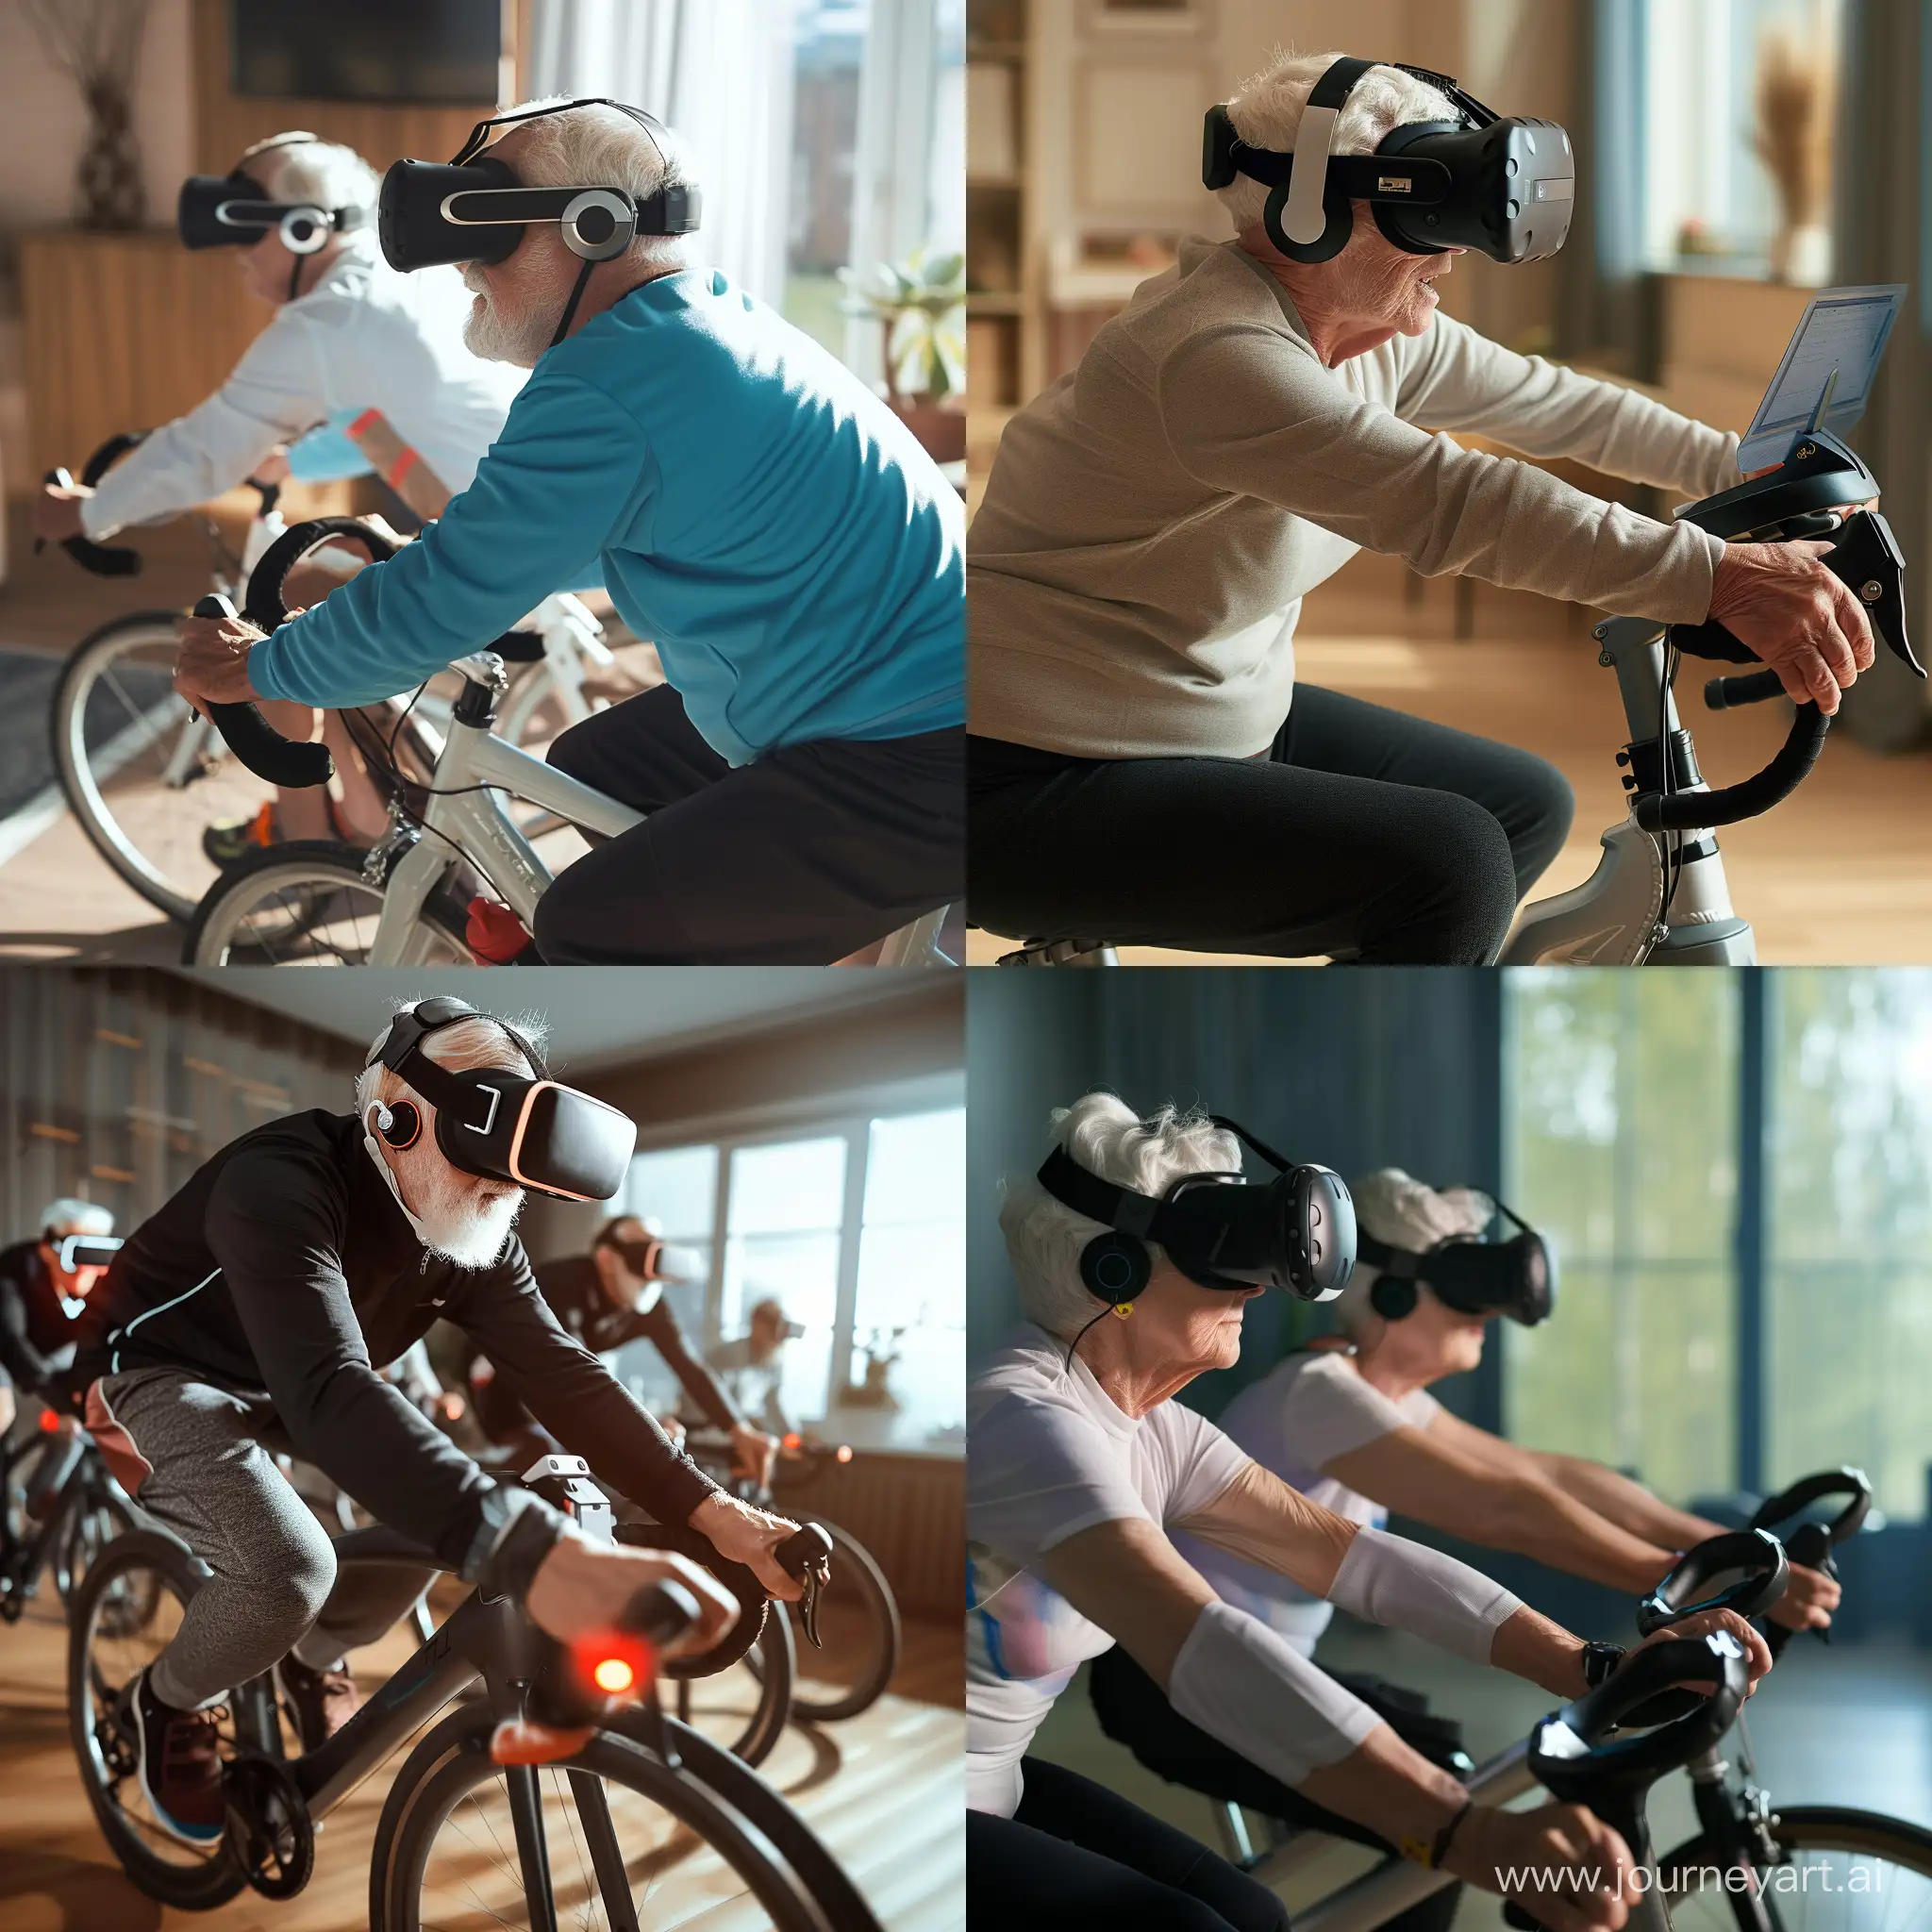 Please build a video game picture representing older adults wearing virtual reality headset while cycling on a home training bicycle 
